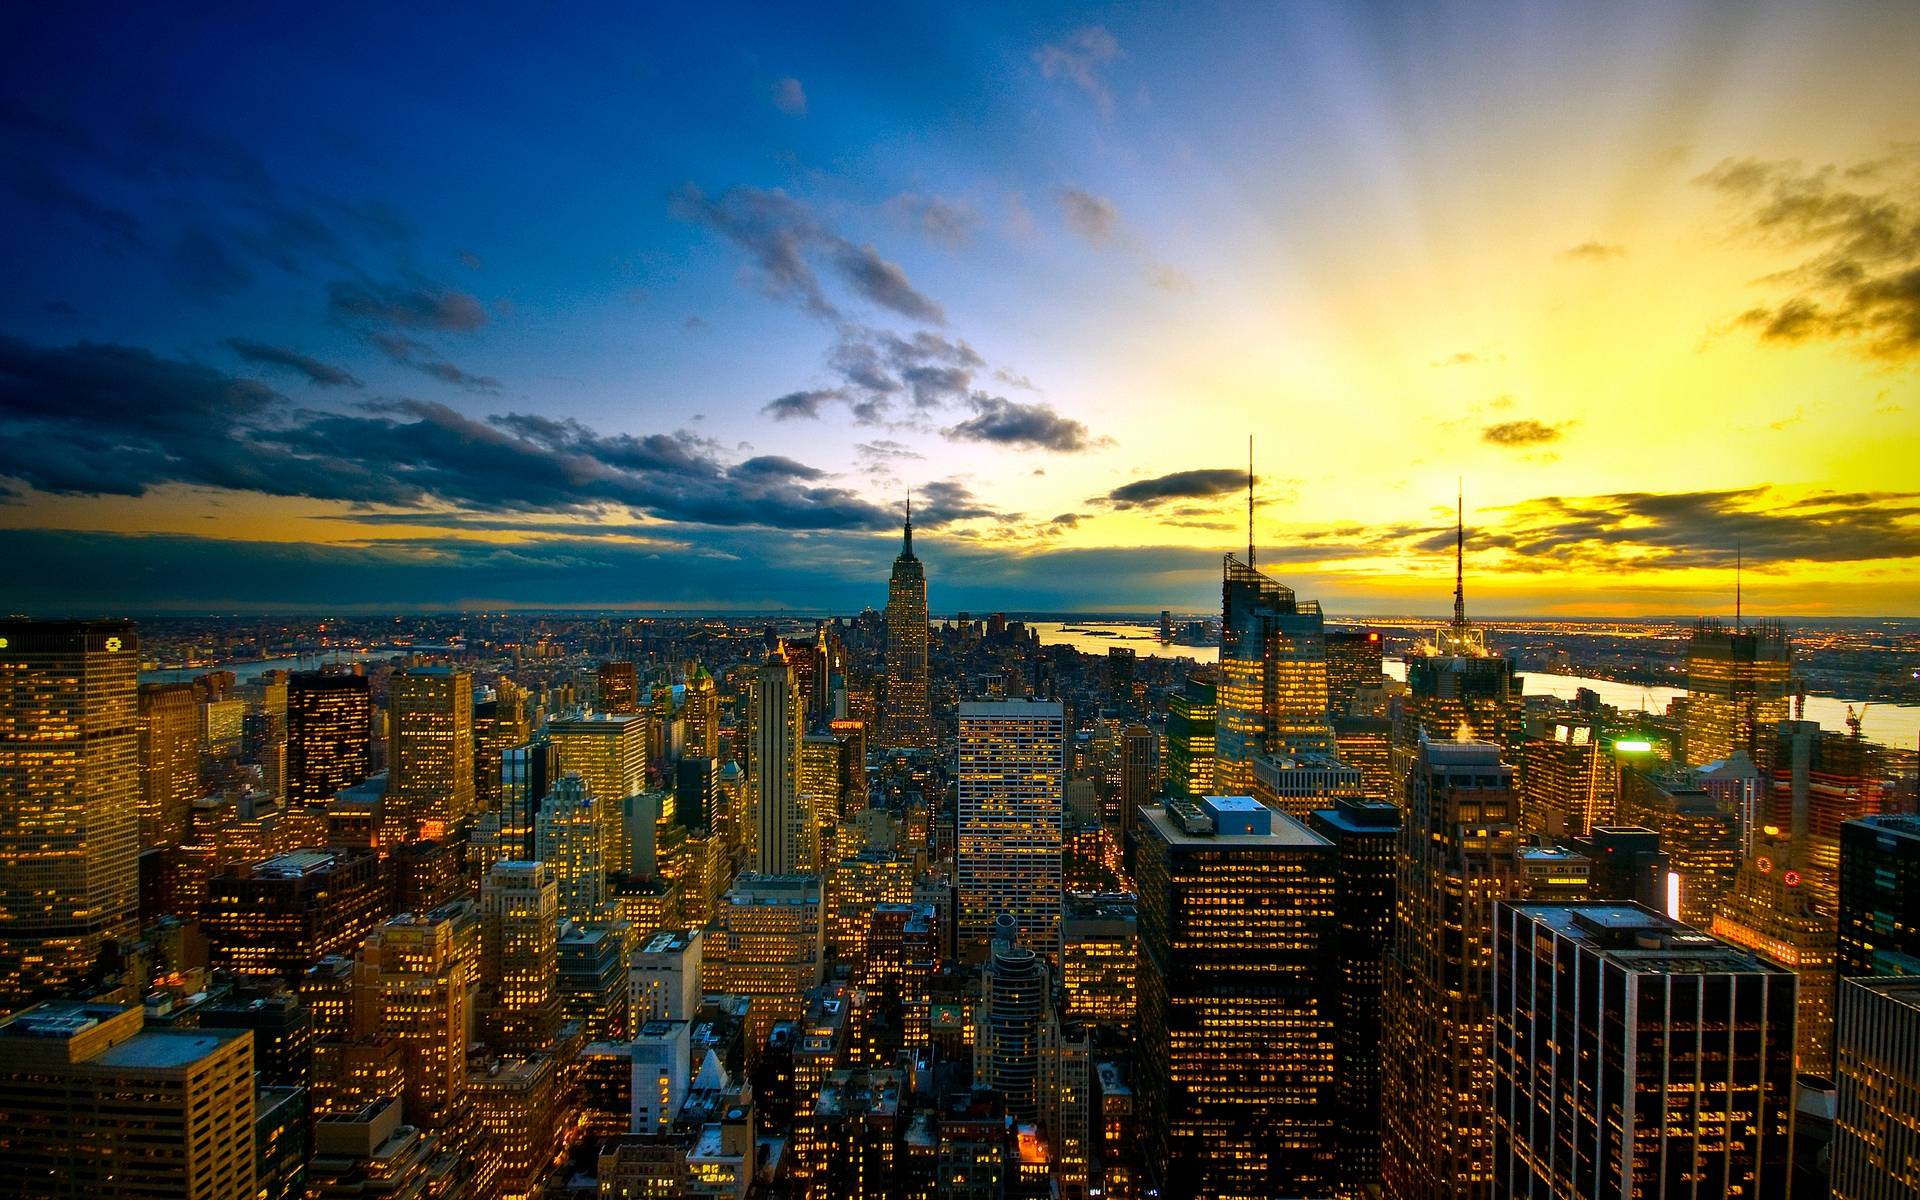 New York City Wallpapers HD Pictures - Wallpaper Cave